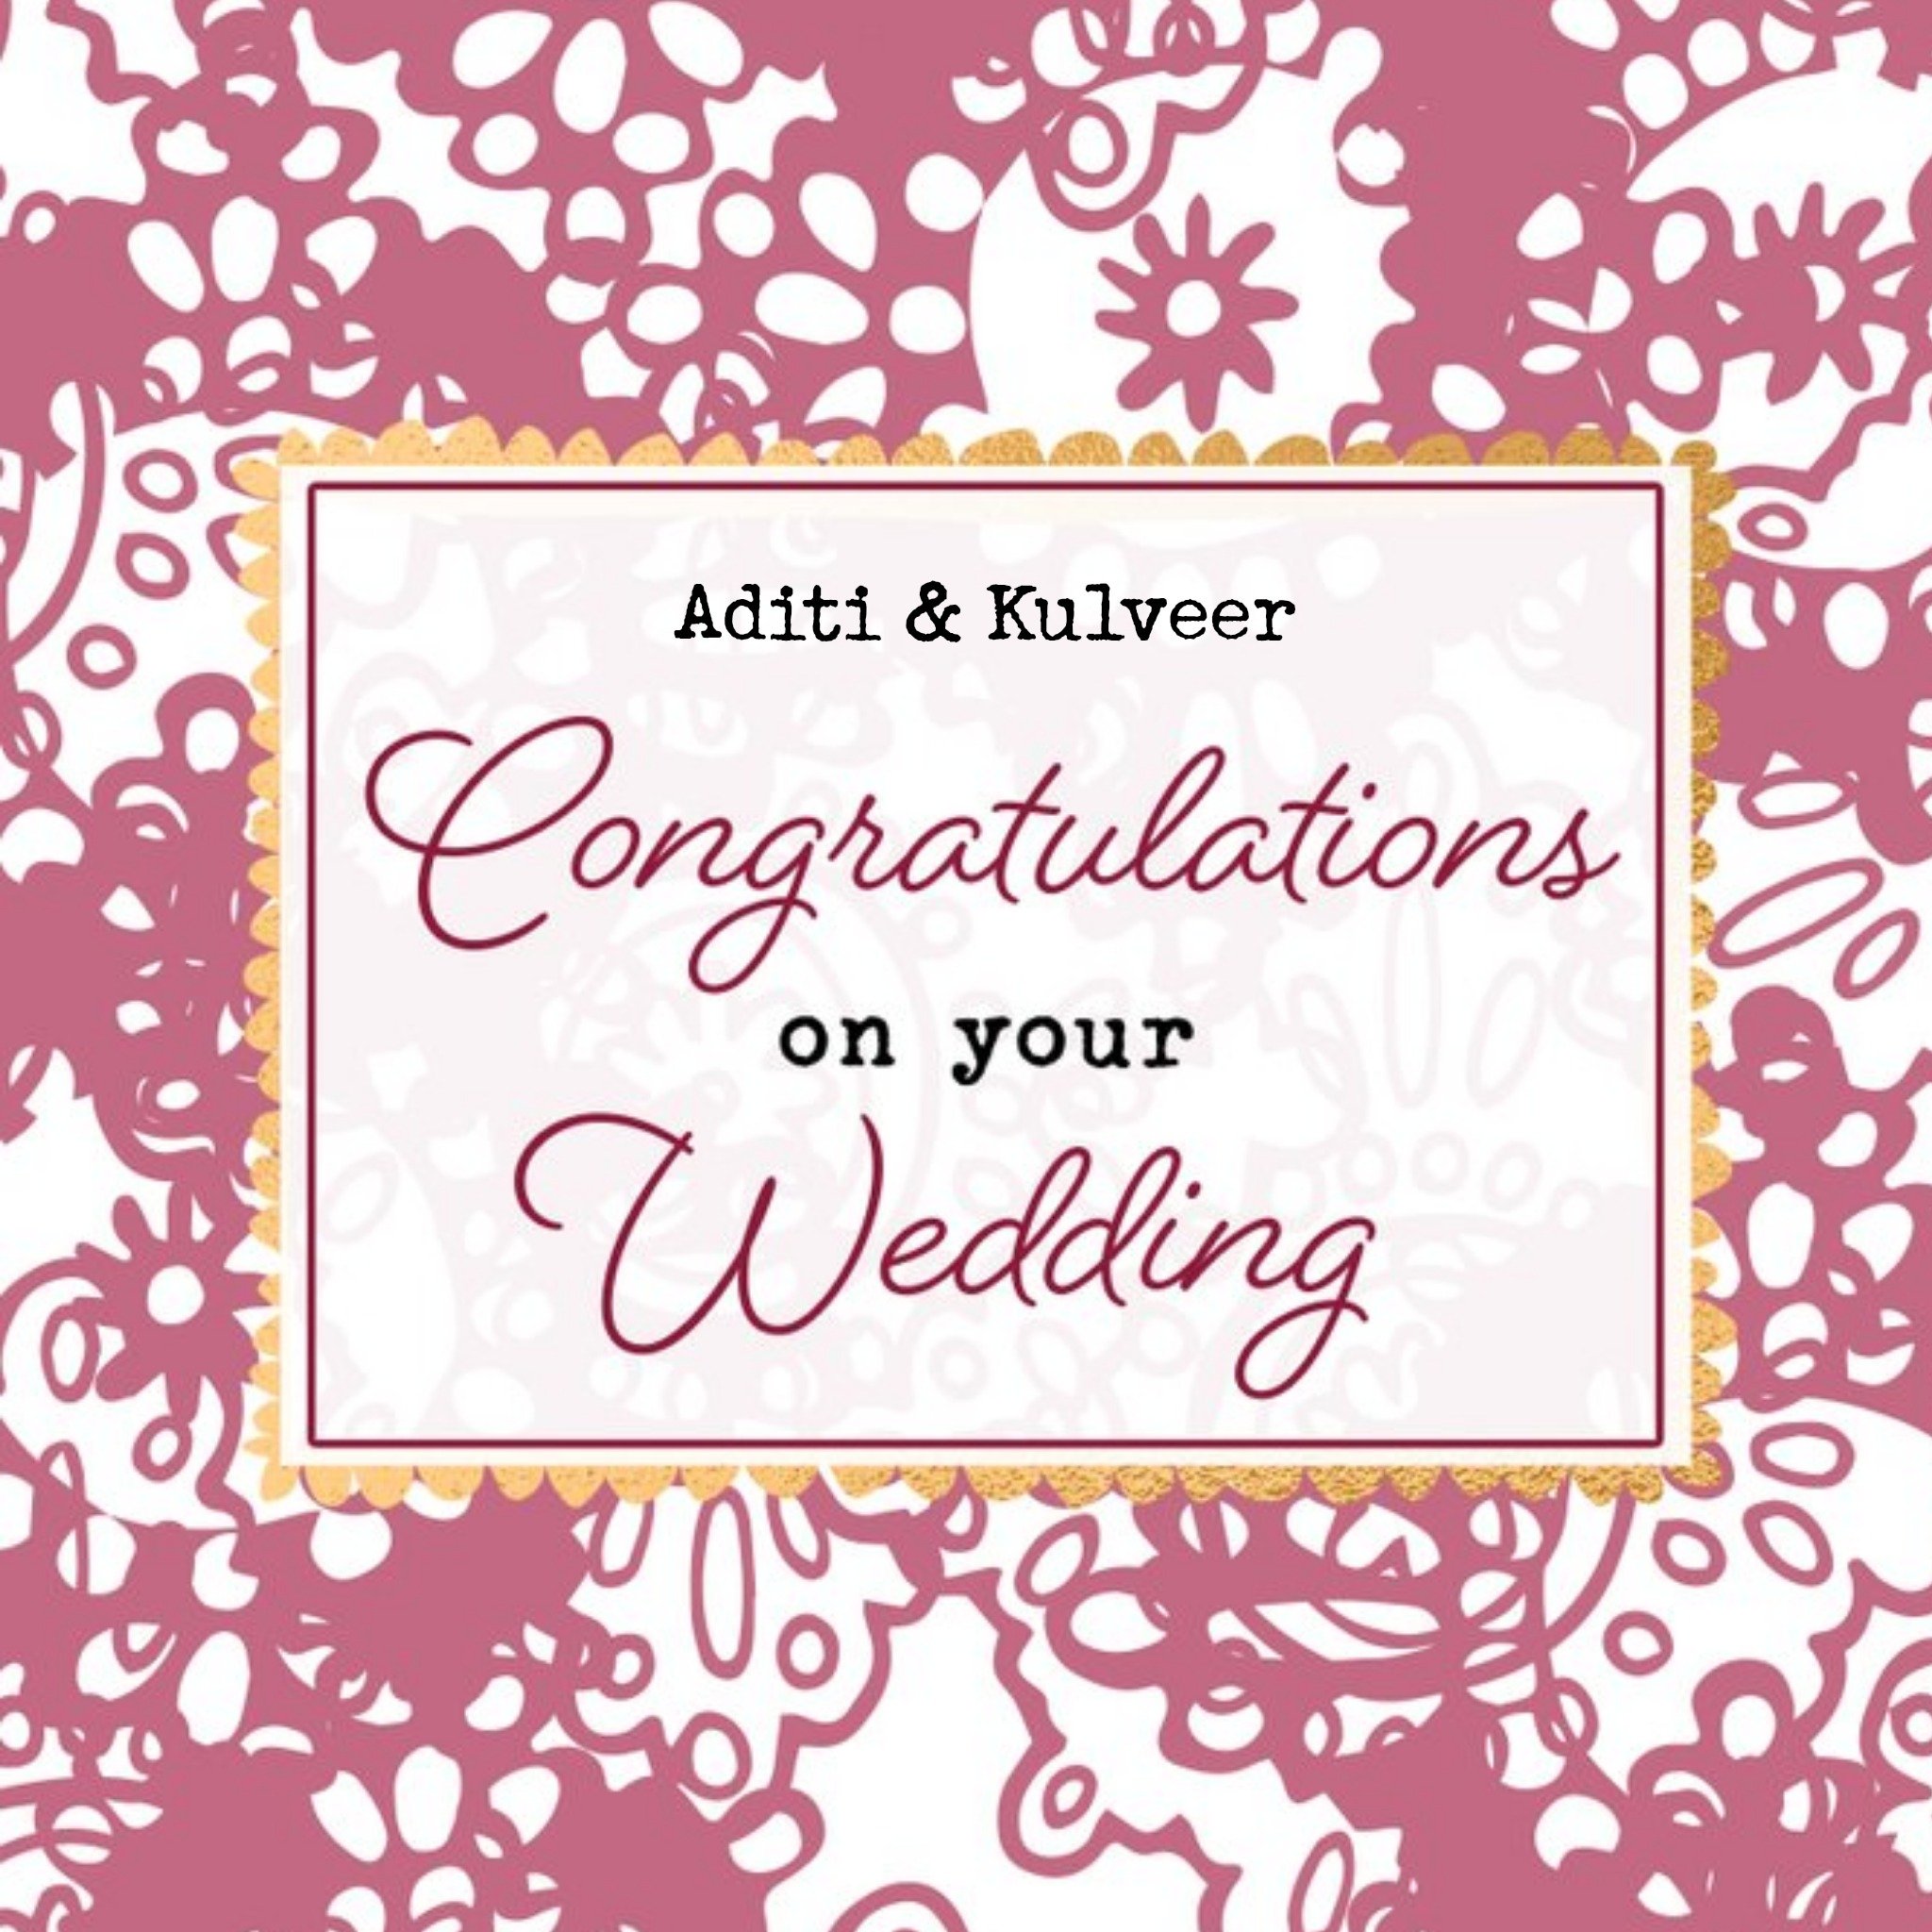 Moonpig Wedding Card - Congratulations On Your Wedding Day - Indian Wedding, Square